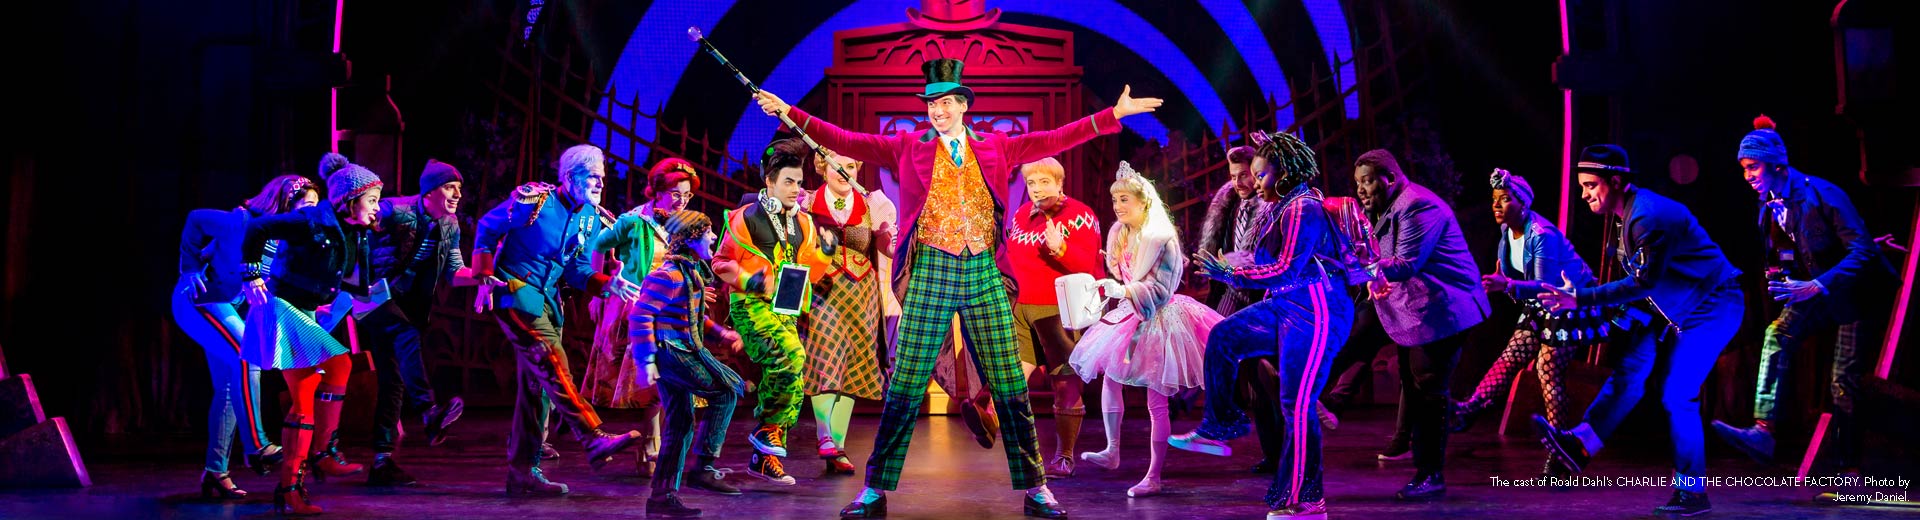 Charlie and the Chocolate Factory | Centennial Concert Hall